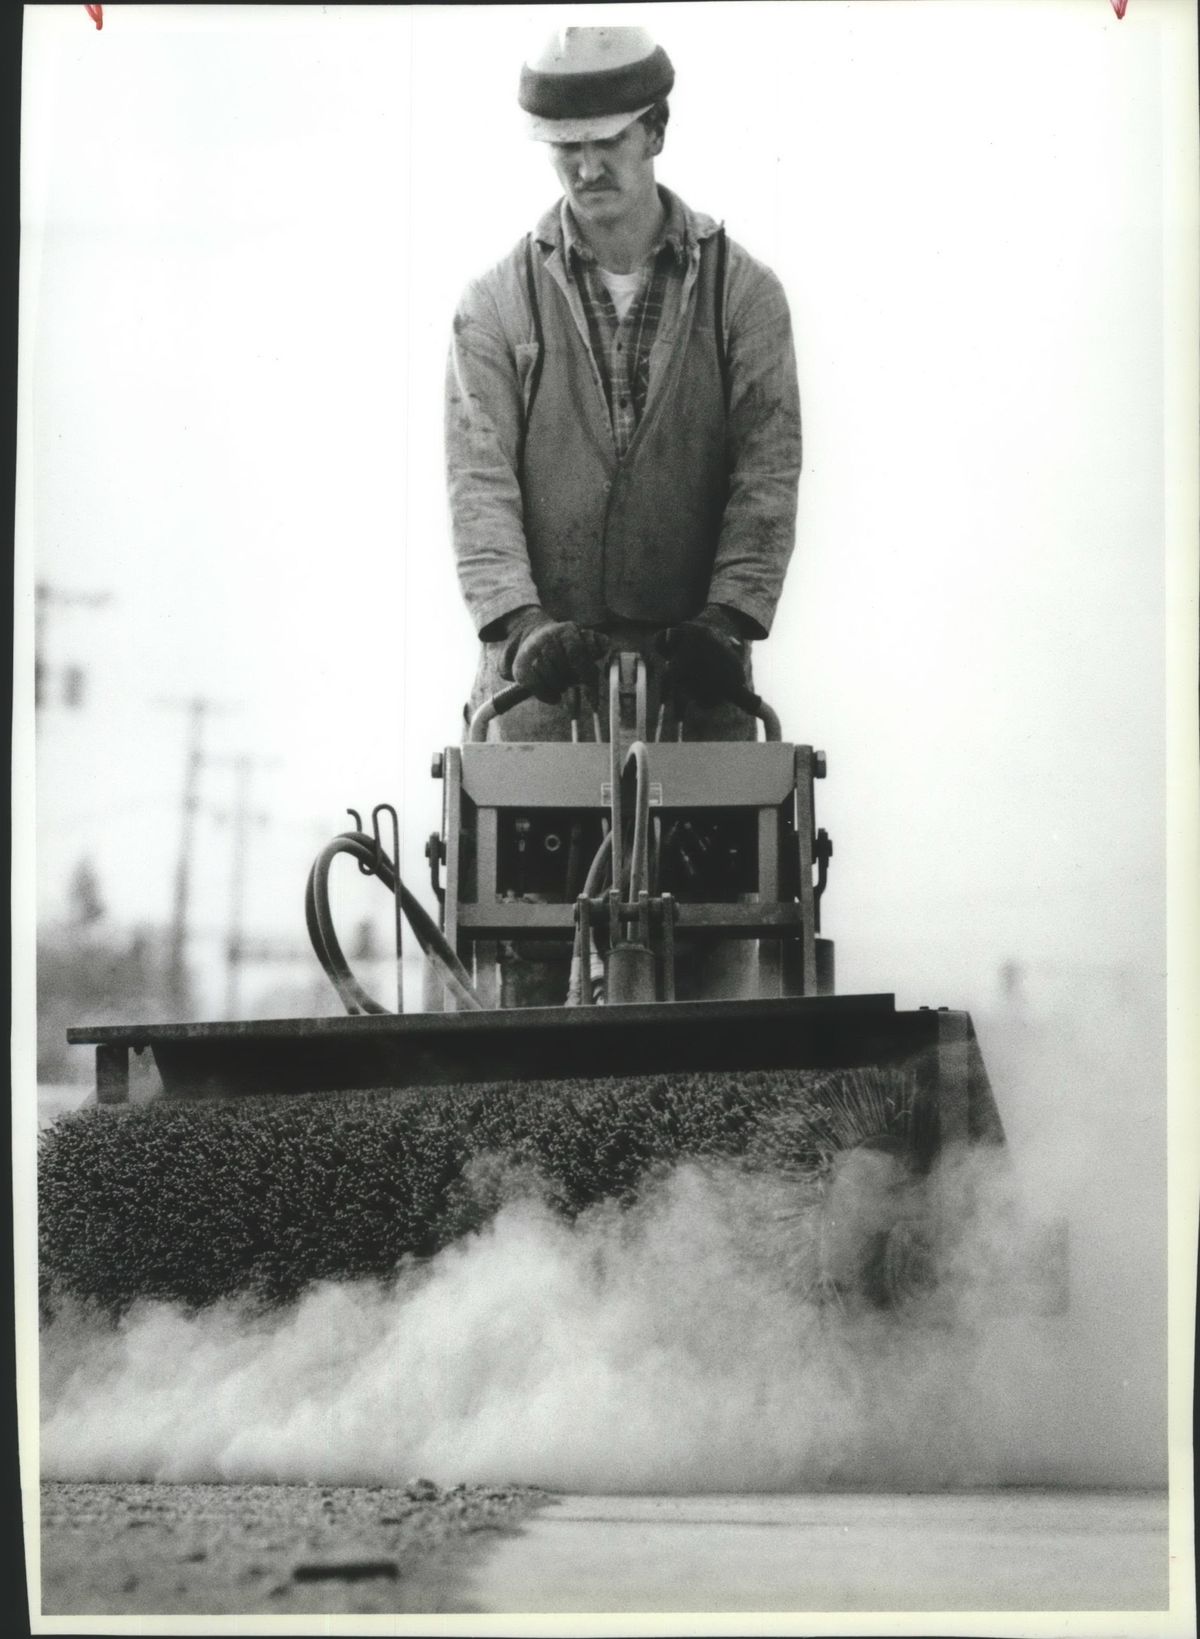 Rod Maki, of the Spokane County Road Department, operates a power brush to clear some of the accumulation from a traffic island on Sprague Avenue near University City in 1988. (Steve  Thompson / The Spokesman-Review)